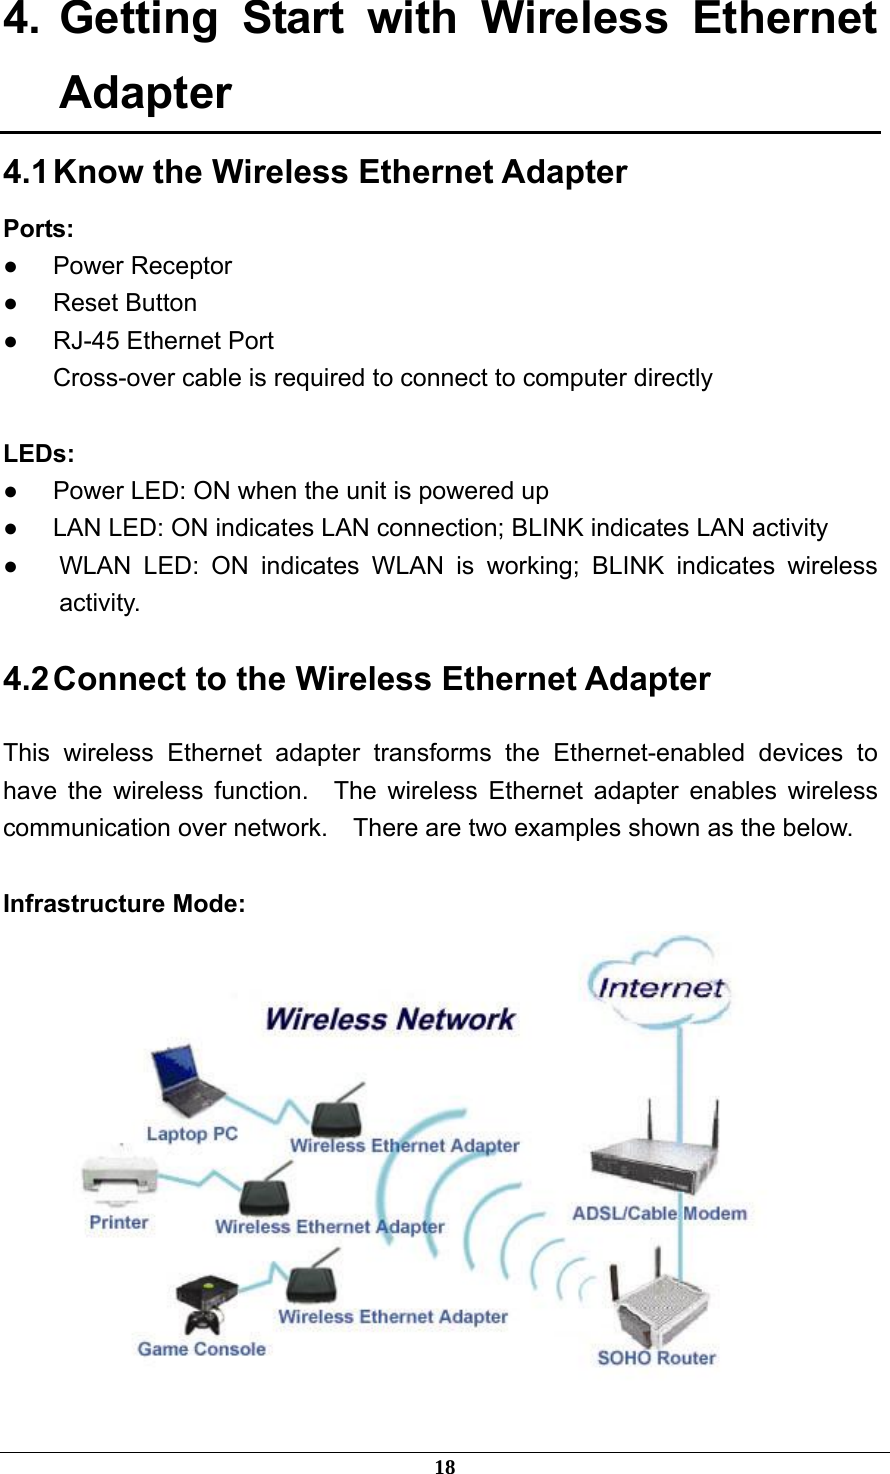 4. Getting Start with Wireless Ethernet Adapter 4.1 Know the Wireless Ethernet Adapter Ports: ● Power Receptor ● Reset Button ●  RJ-45 Ethernet Port Cross-over cable is required to connect to computer directly  LEDs: ●  Power LED: ON when the unit is powered up ●  LAN LED: ON indicates LAN connection; BLINK indicates LAN activity ●  WLAN LED: ON indicates WLAN is working; BLINK indicates wireless activity. 4.2 Connect to the Wireless Ethernet Adapter This wireless Ethernet adapter transforms the Ethernet-enabled devices to have the wireless function.  The wireless Ethernet adapter enables wireless communication over network.    There are two examples shown as the below.  Infrastructure Mode:  18 